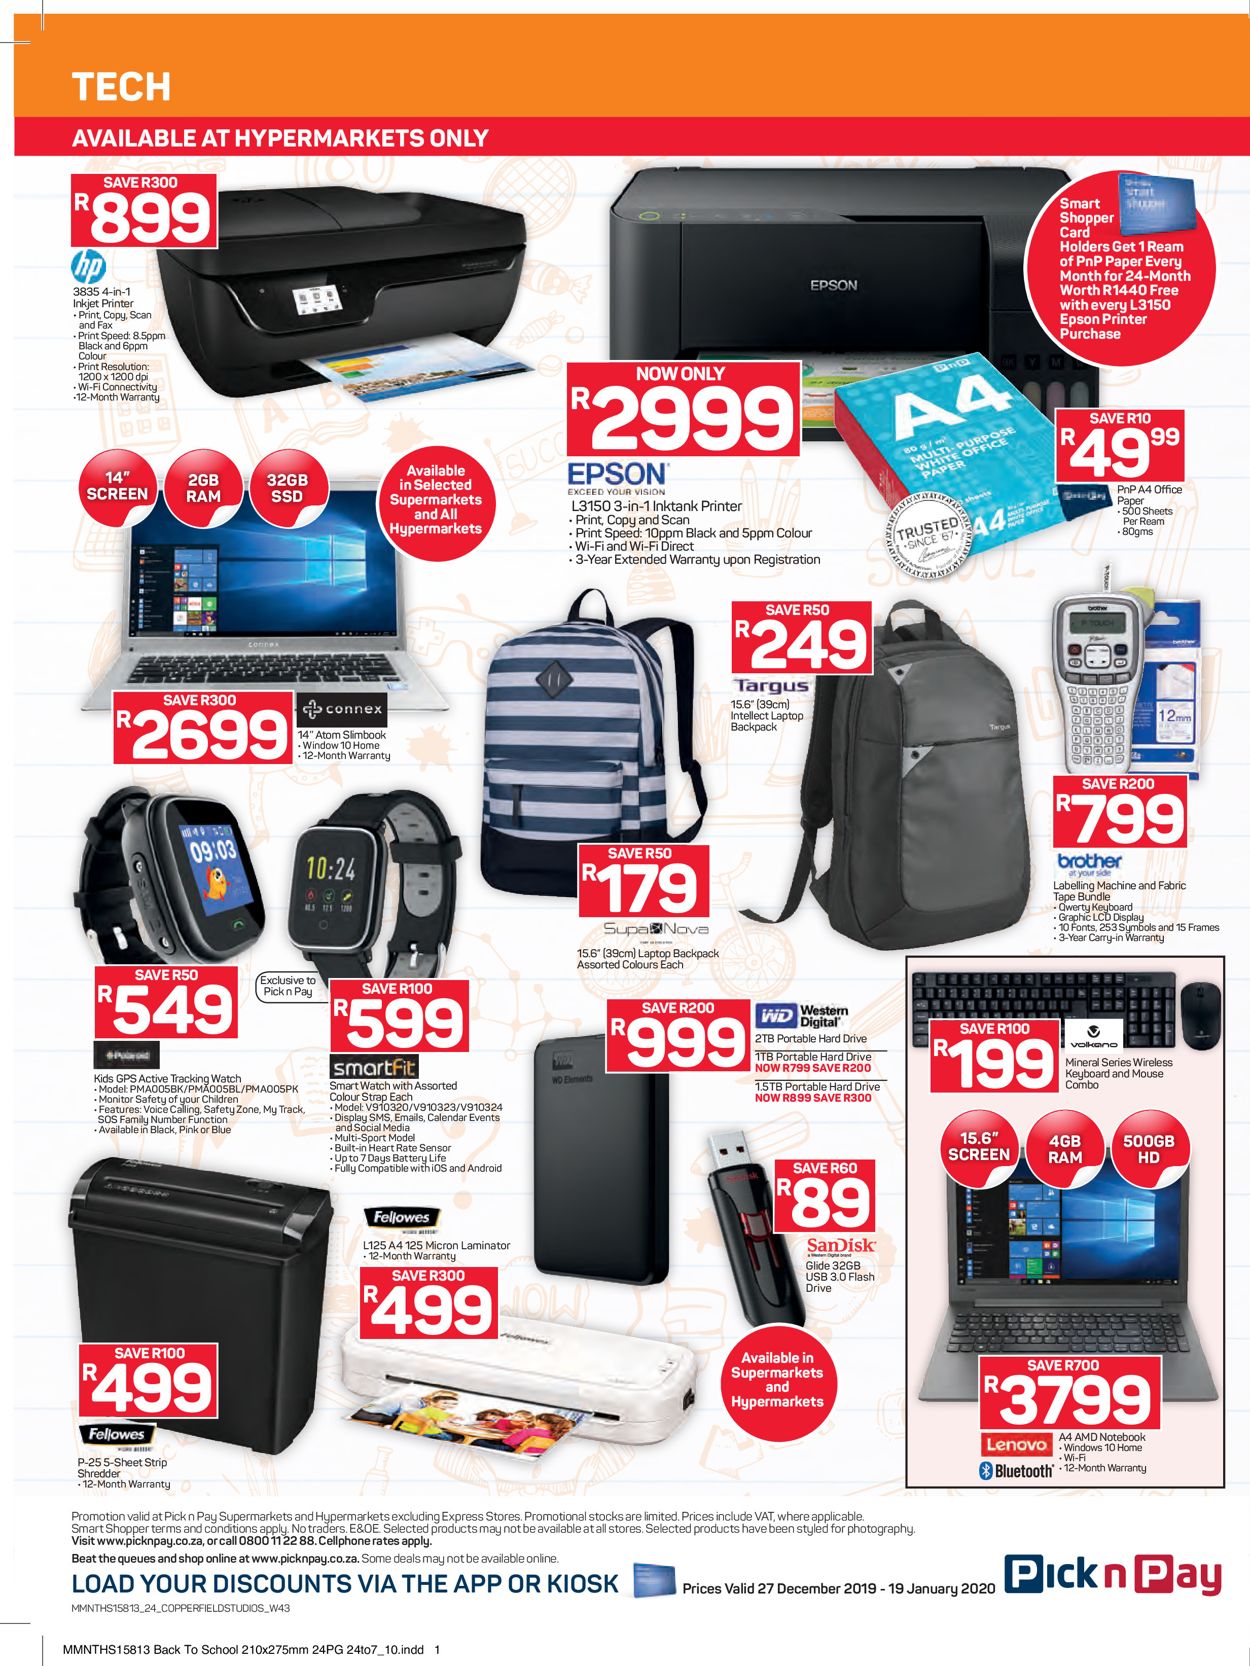 Pick n Pay Back 2 School Catalogue - 2019/12/27-2020/01/19